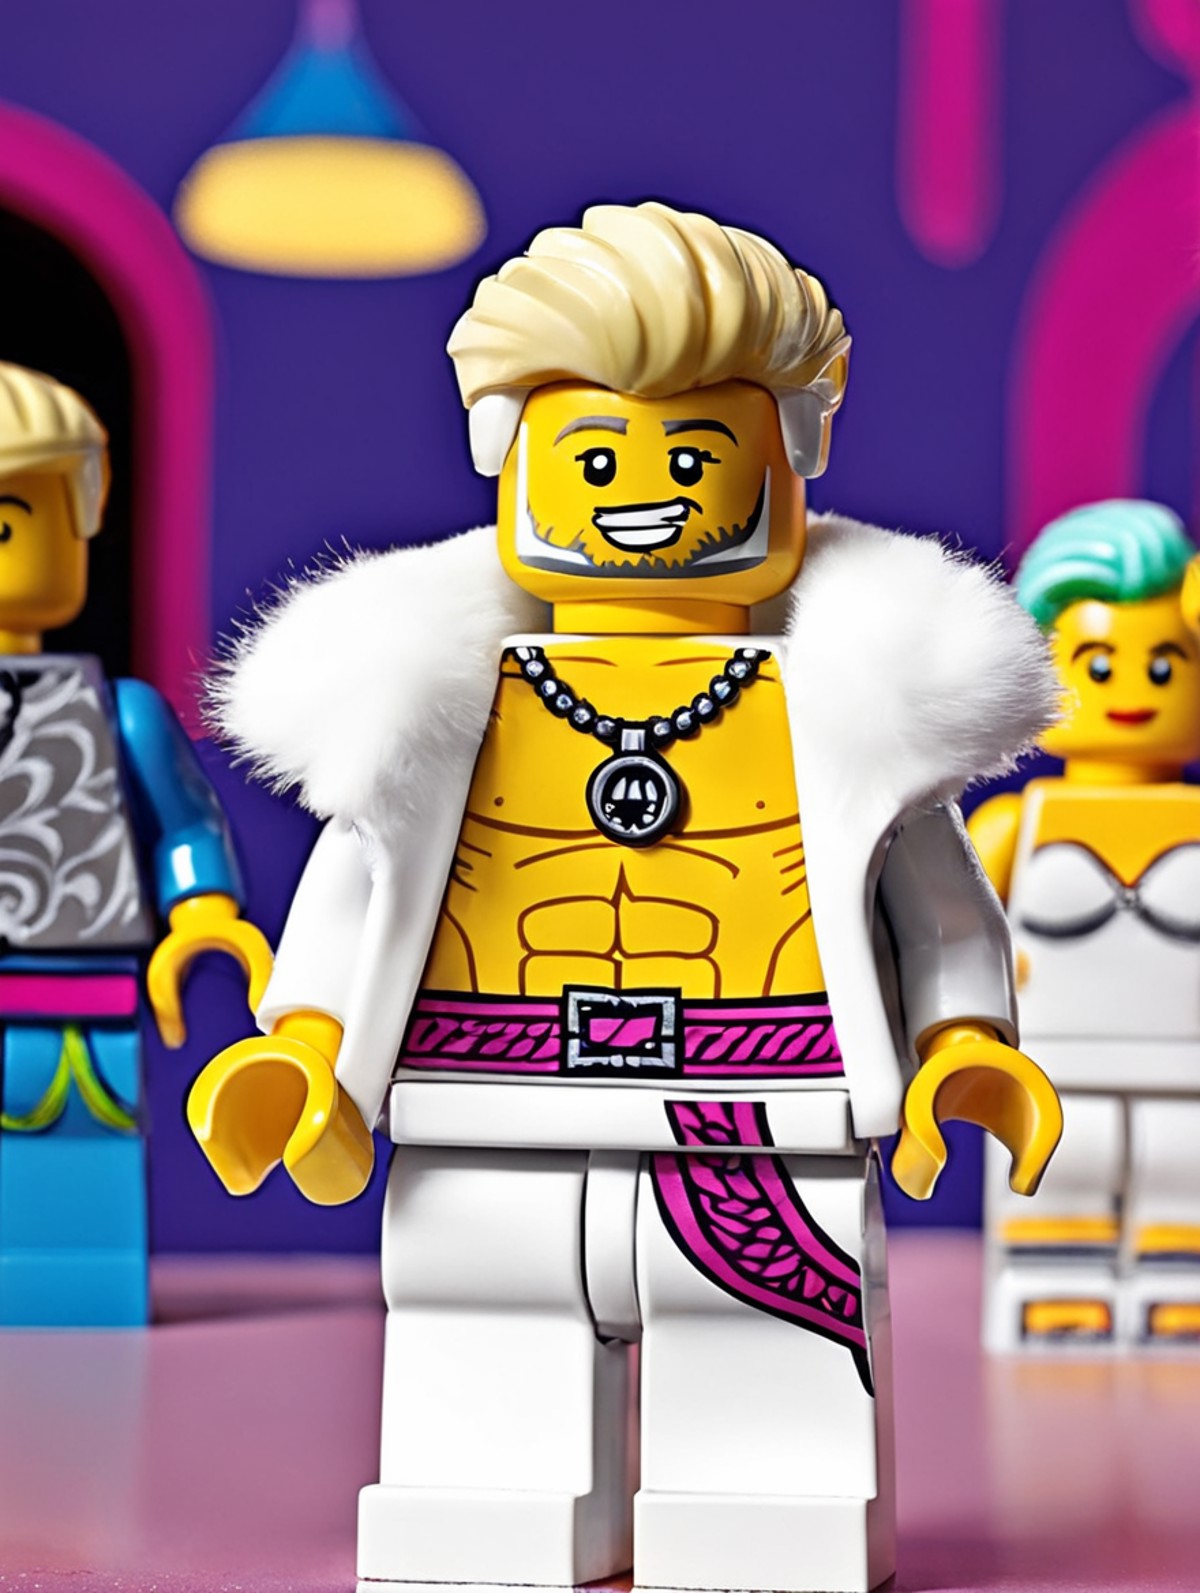 <lora:Lego_XL_v2.1:0.8>
LEGO MiniFig. 
A man with platinum blonde hair and an athletic build wears a luxurious white fur c...